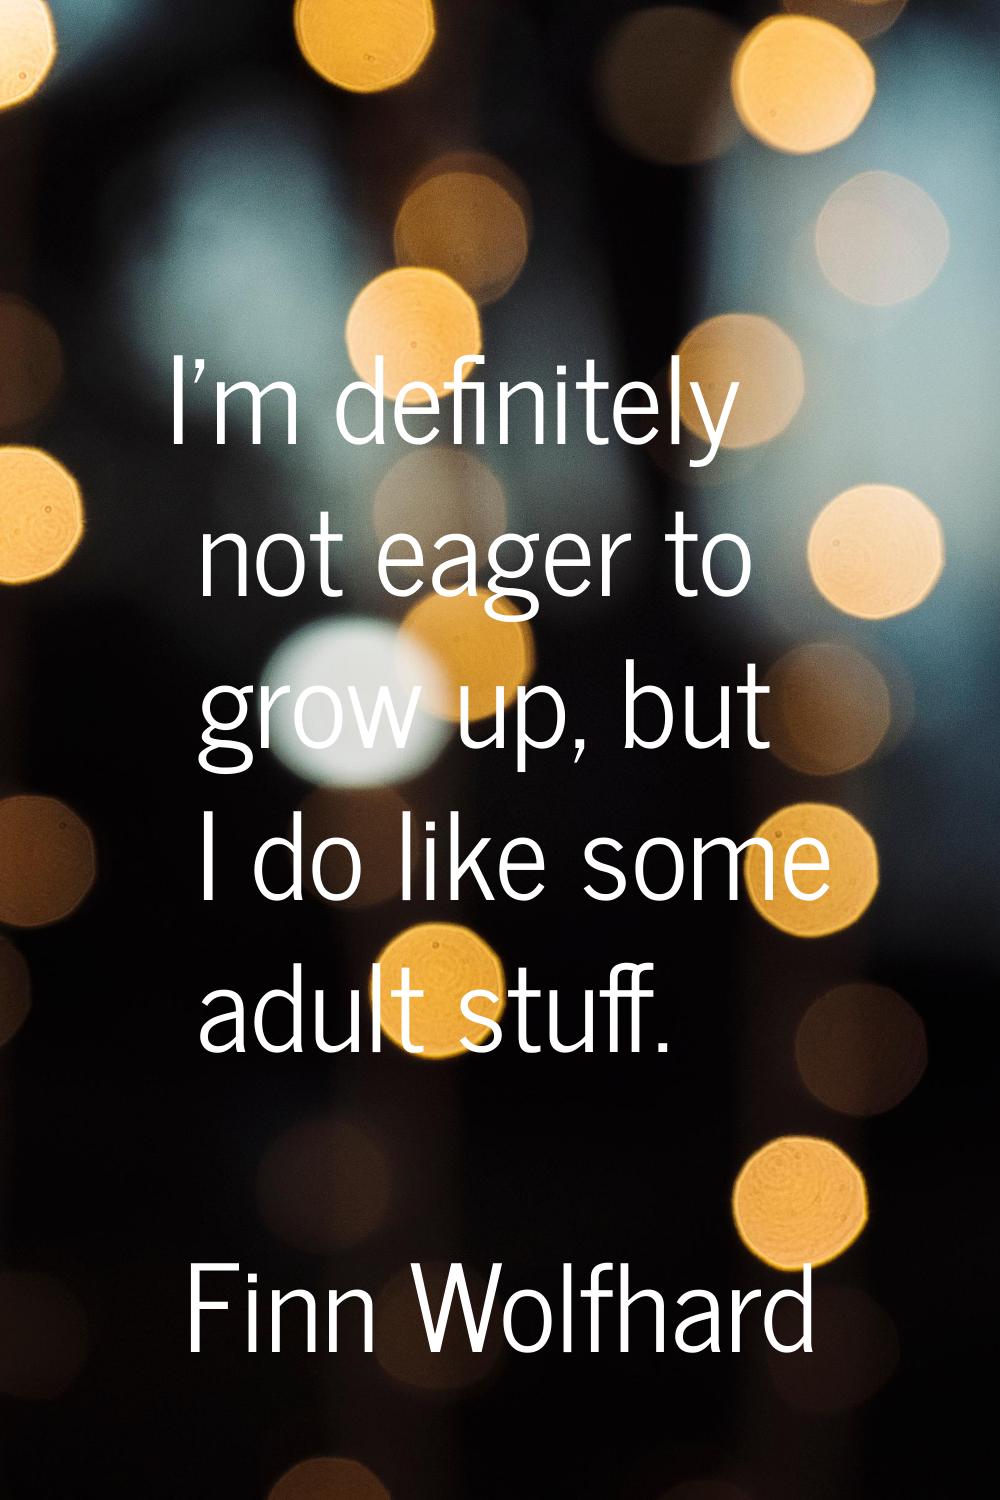 I'm definitely not eager to grow up, but I do like some adult stuff.